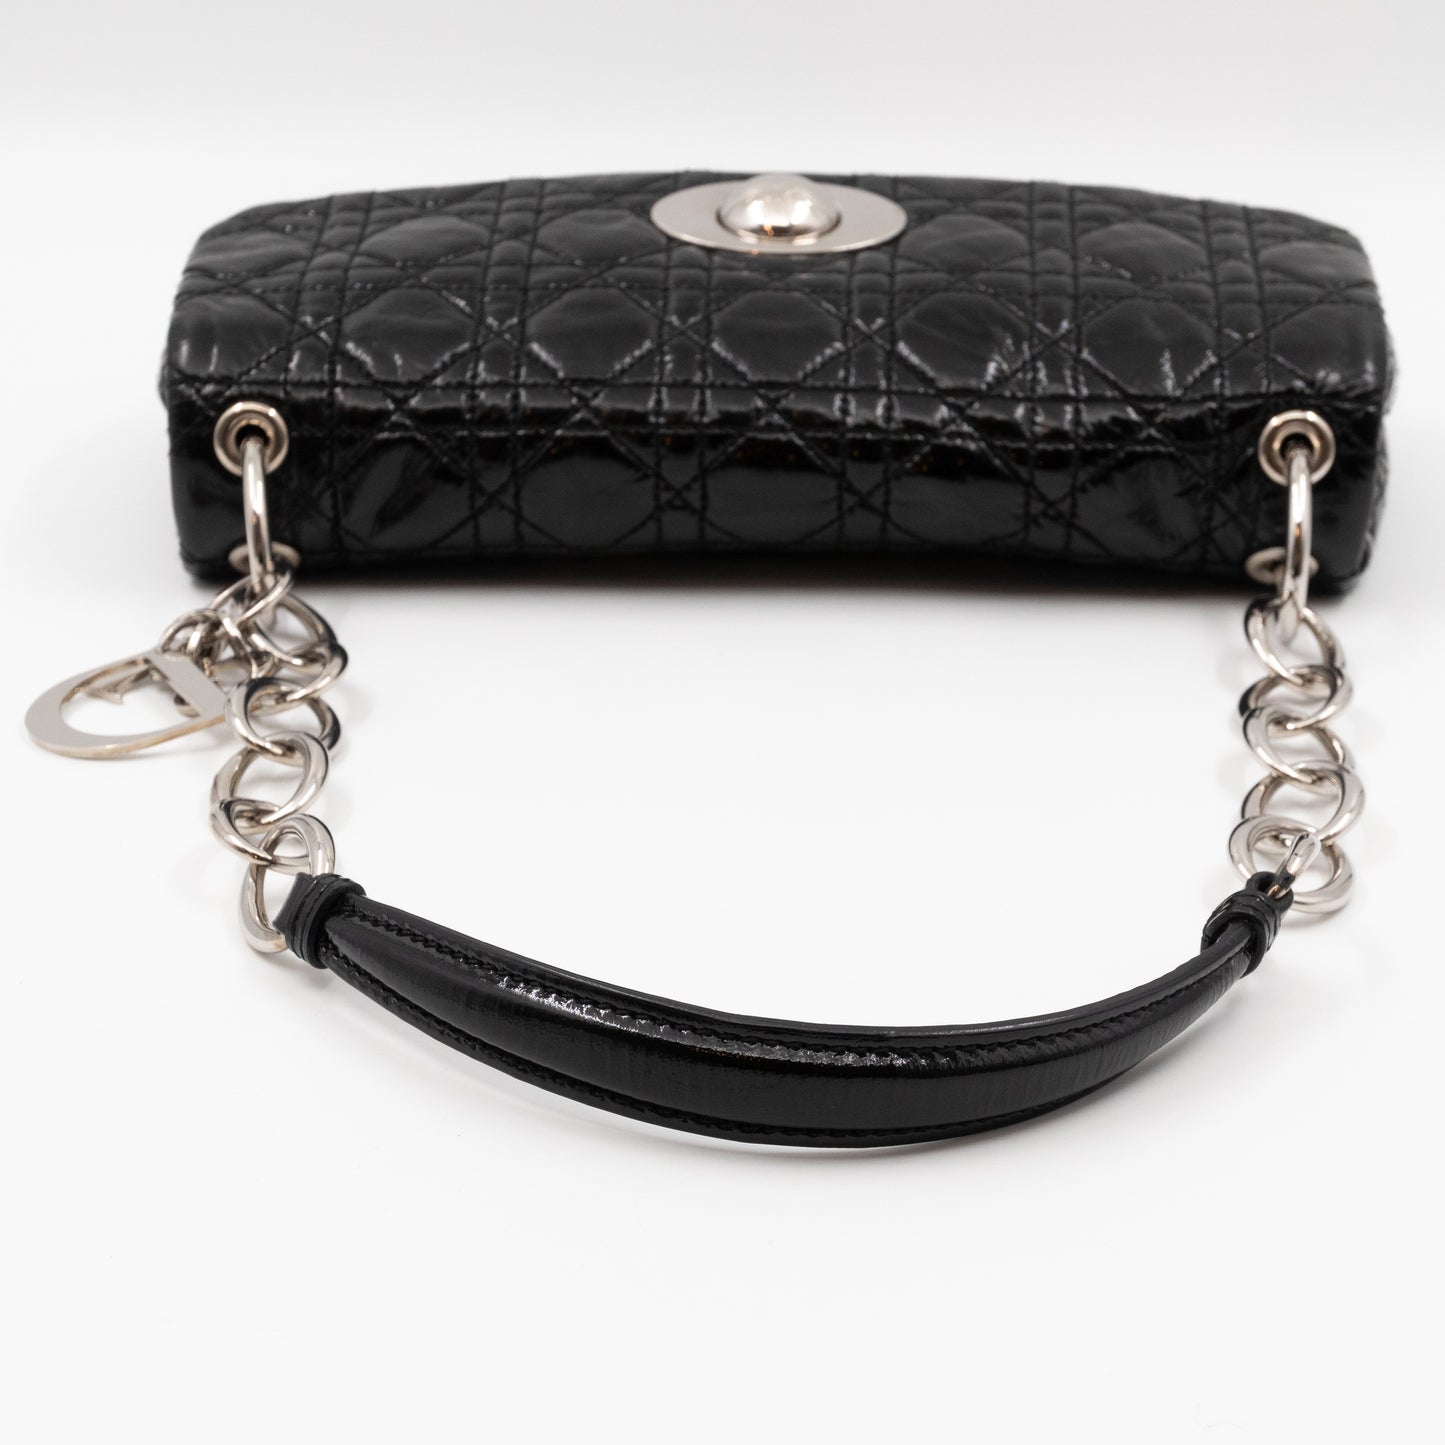 Rendezvous Flap Bag Cannage Quilted Black Patent Leather